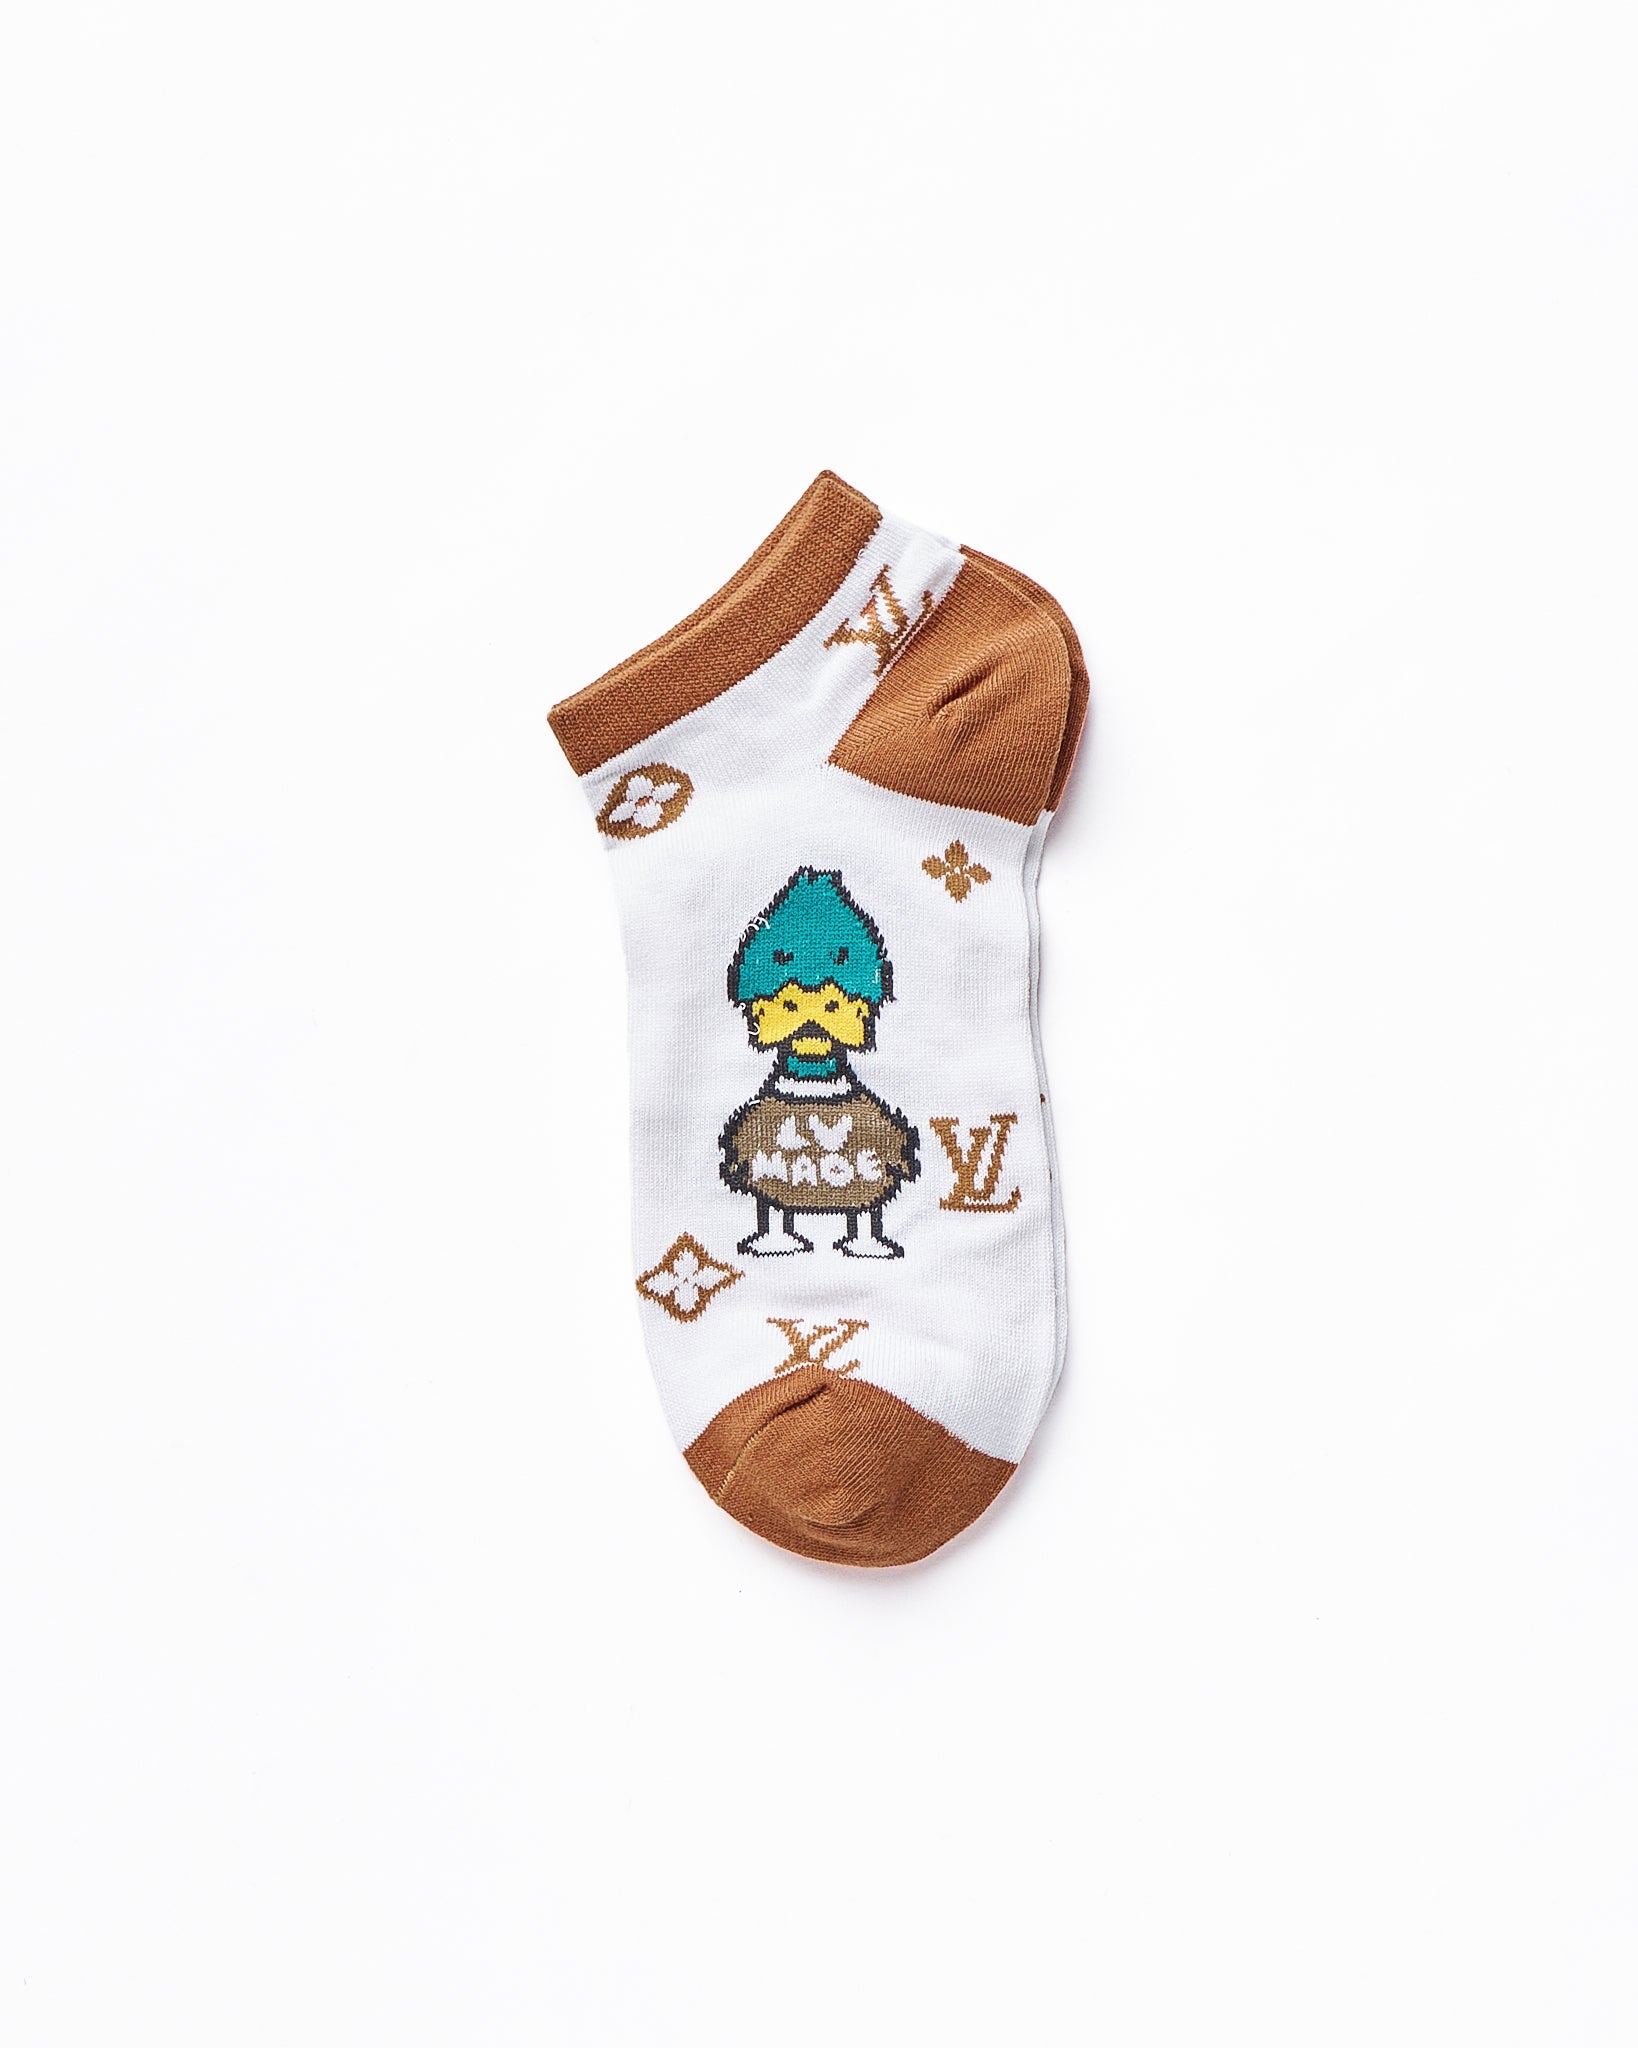 MOI OUTFIT-Duck Logo Printed 5 Pairs Low Cut Socks 13.90